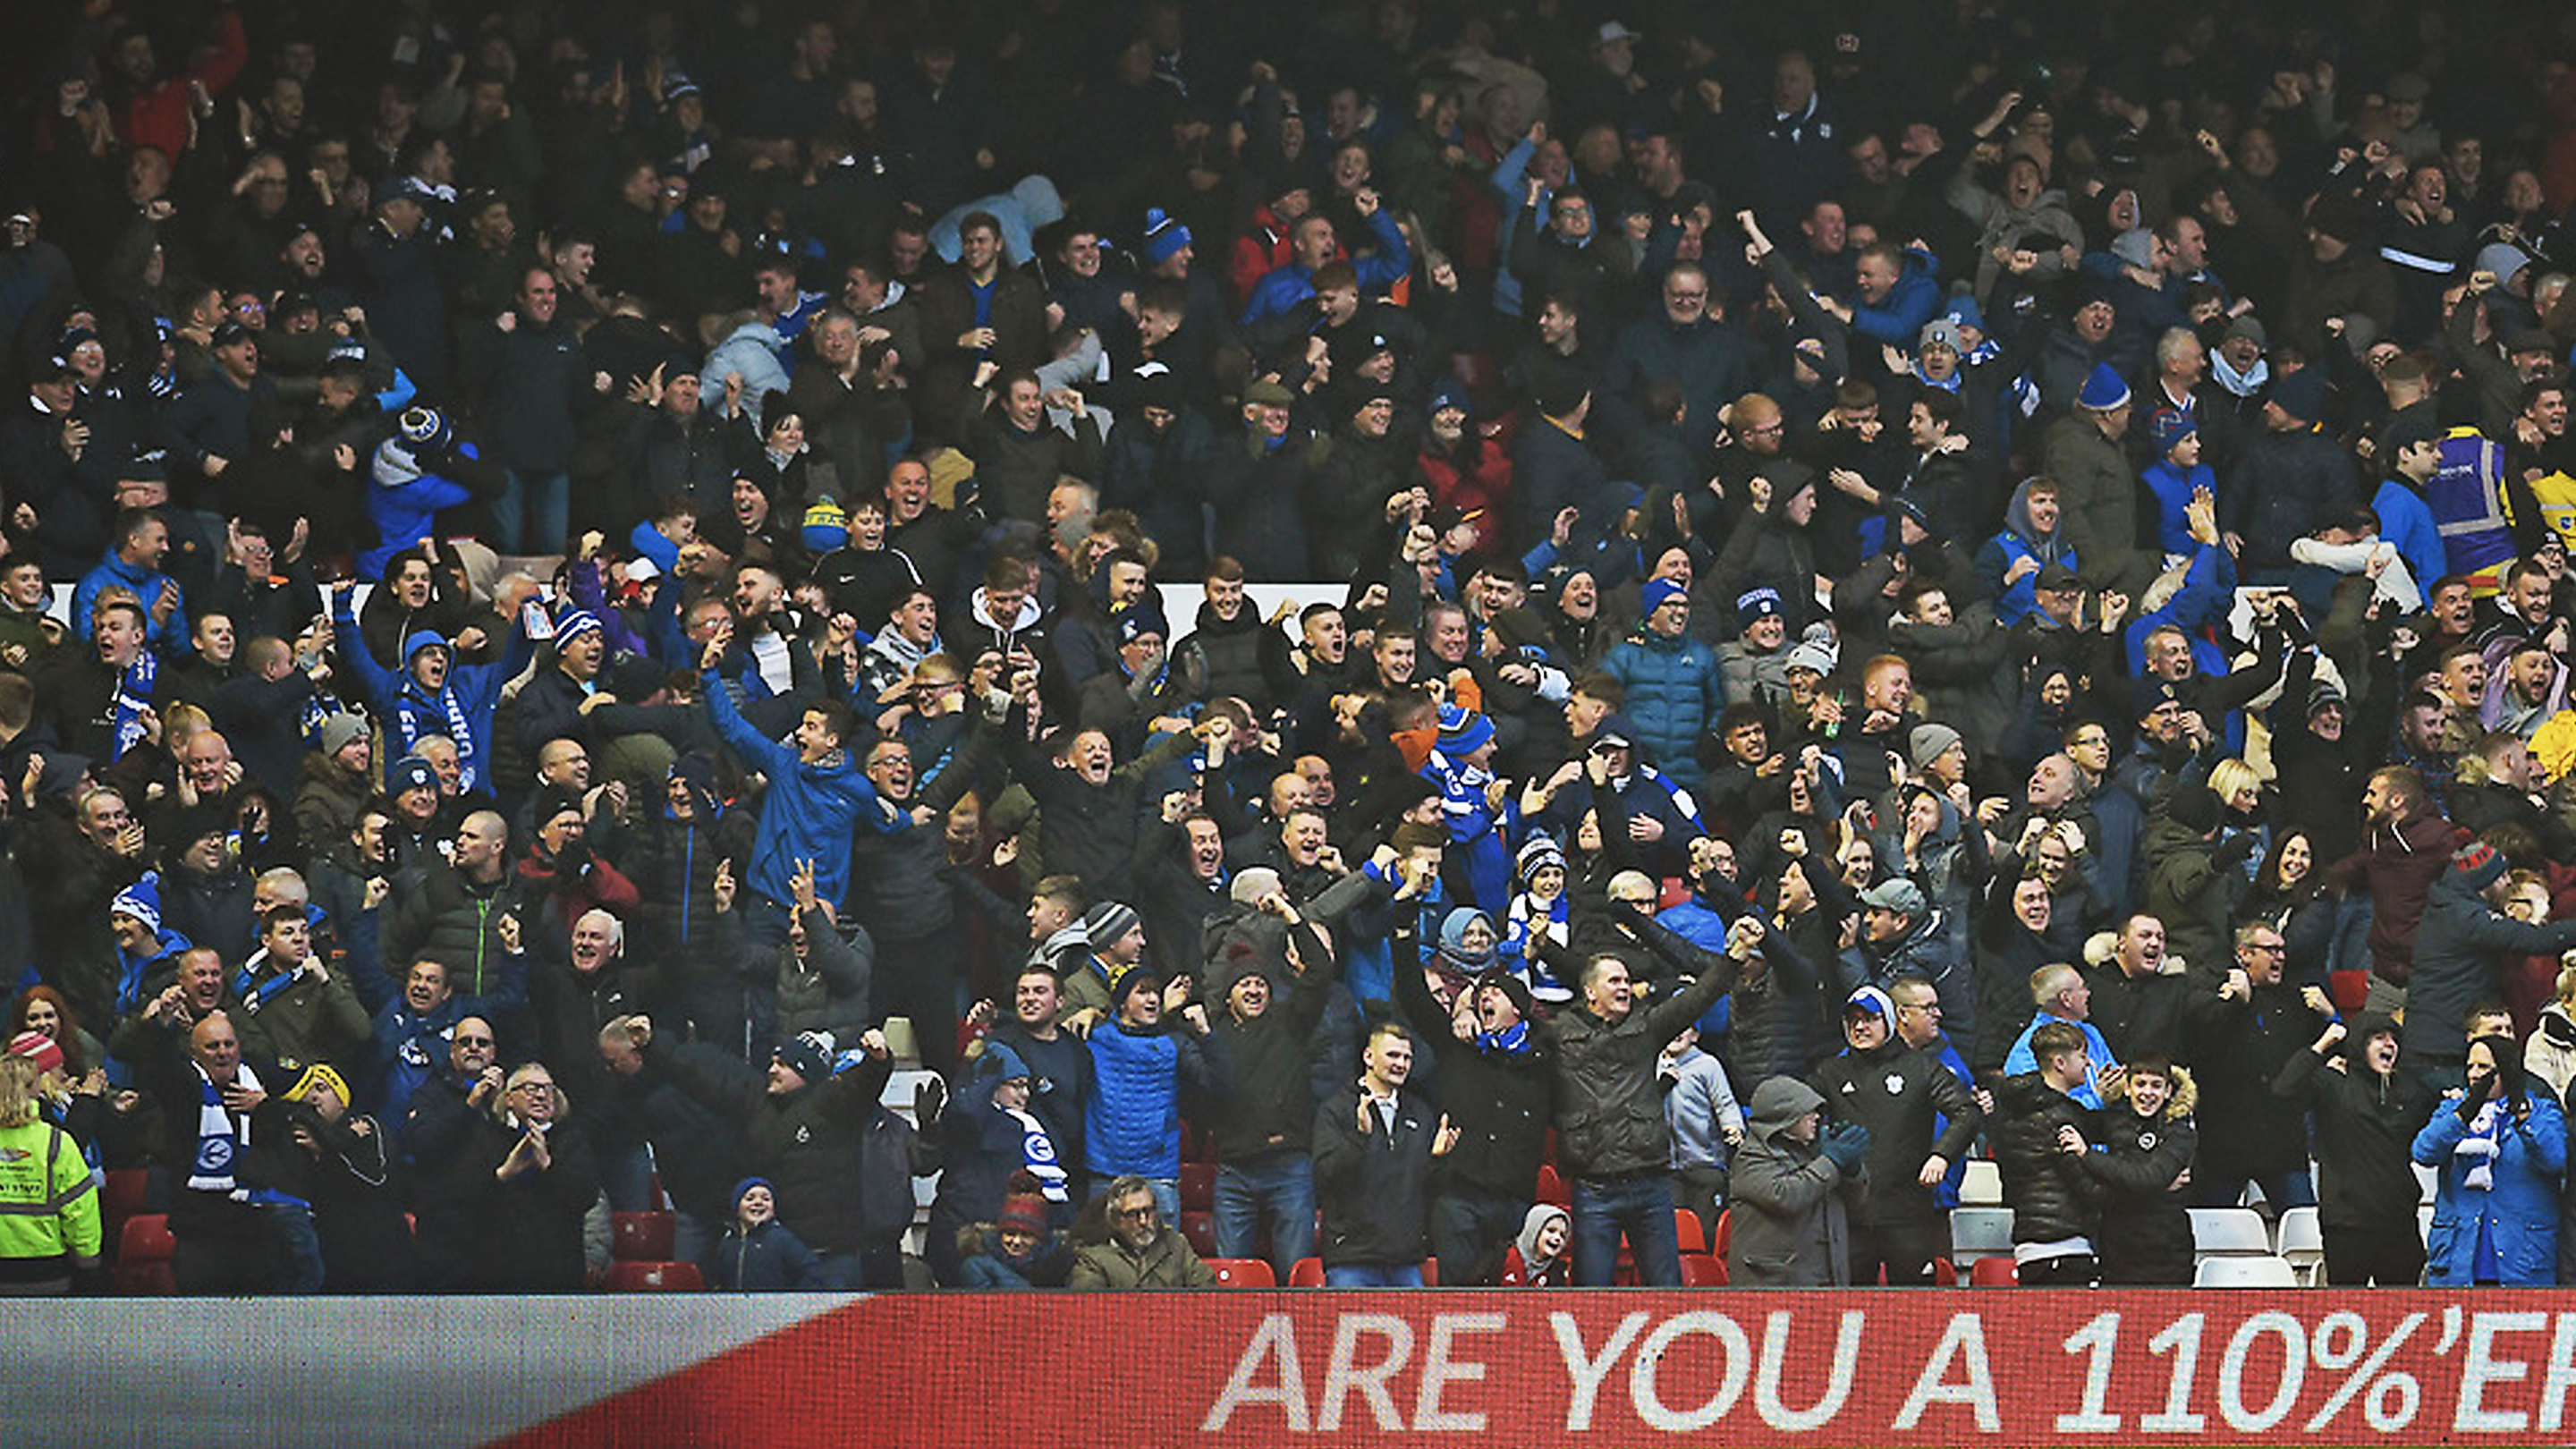 The City fans celebrate NML's goal...